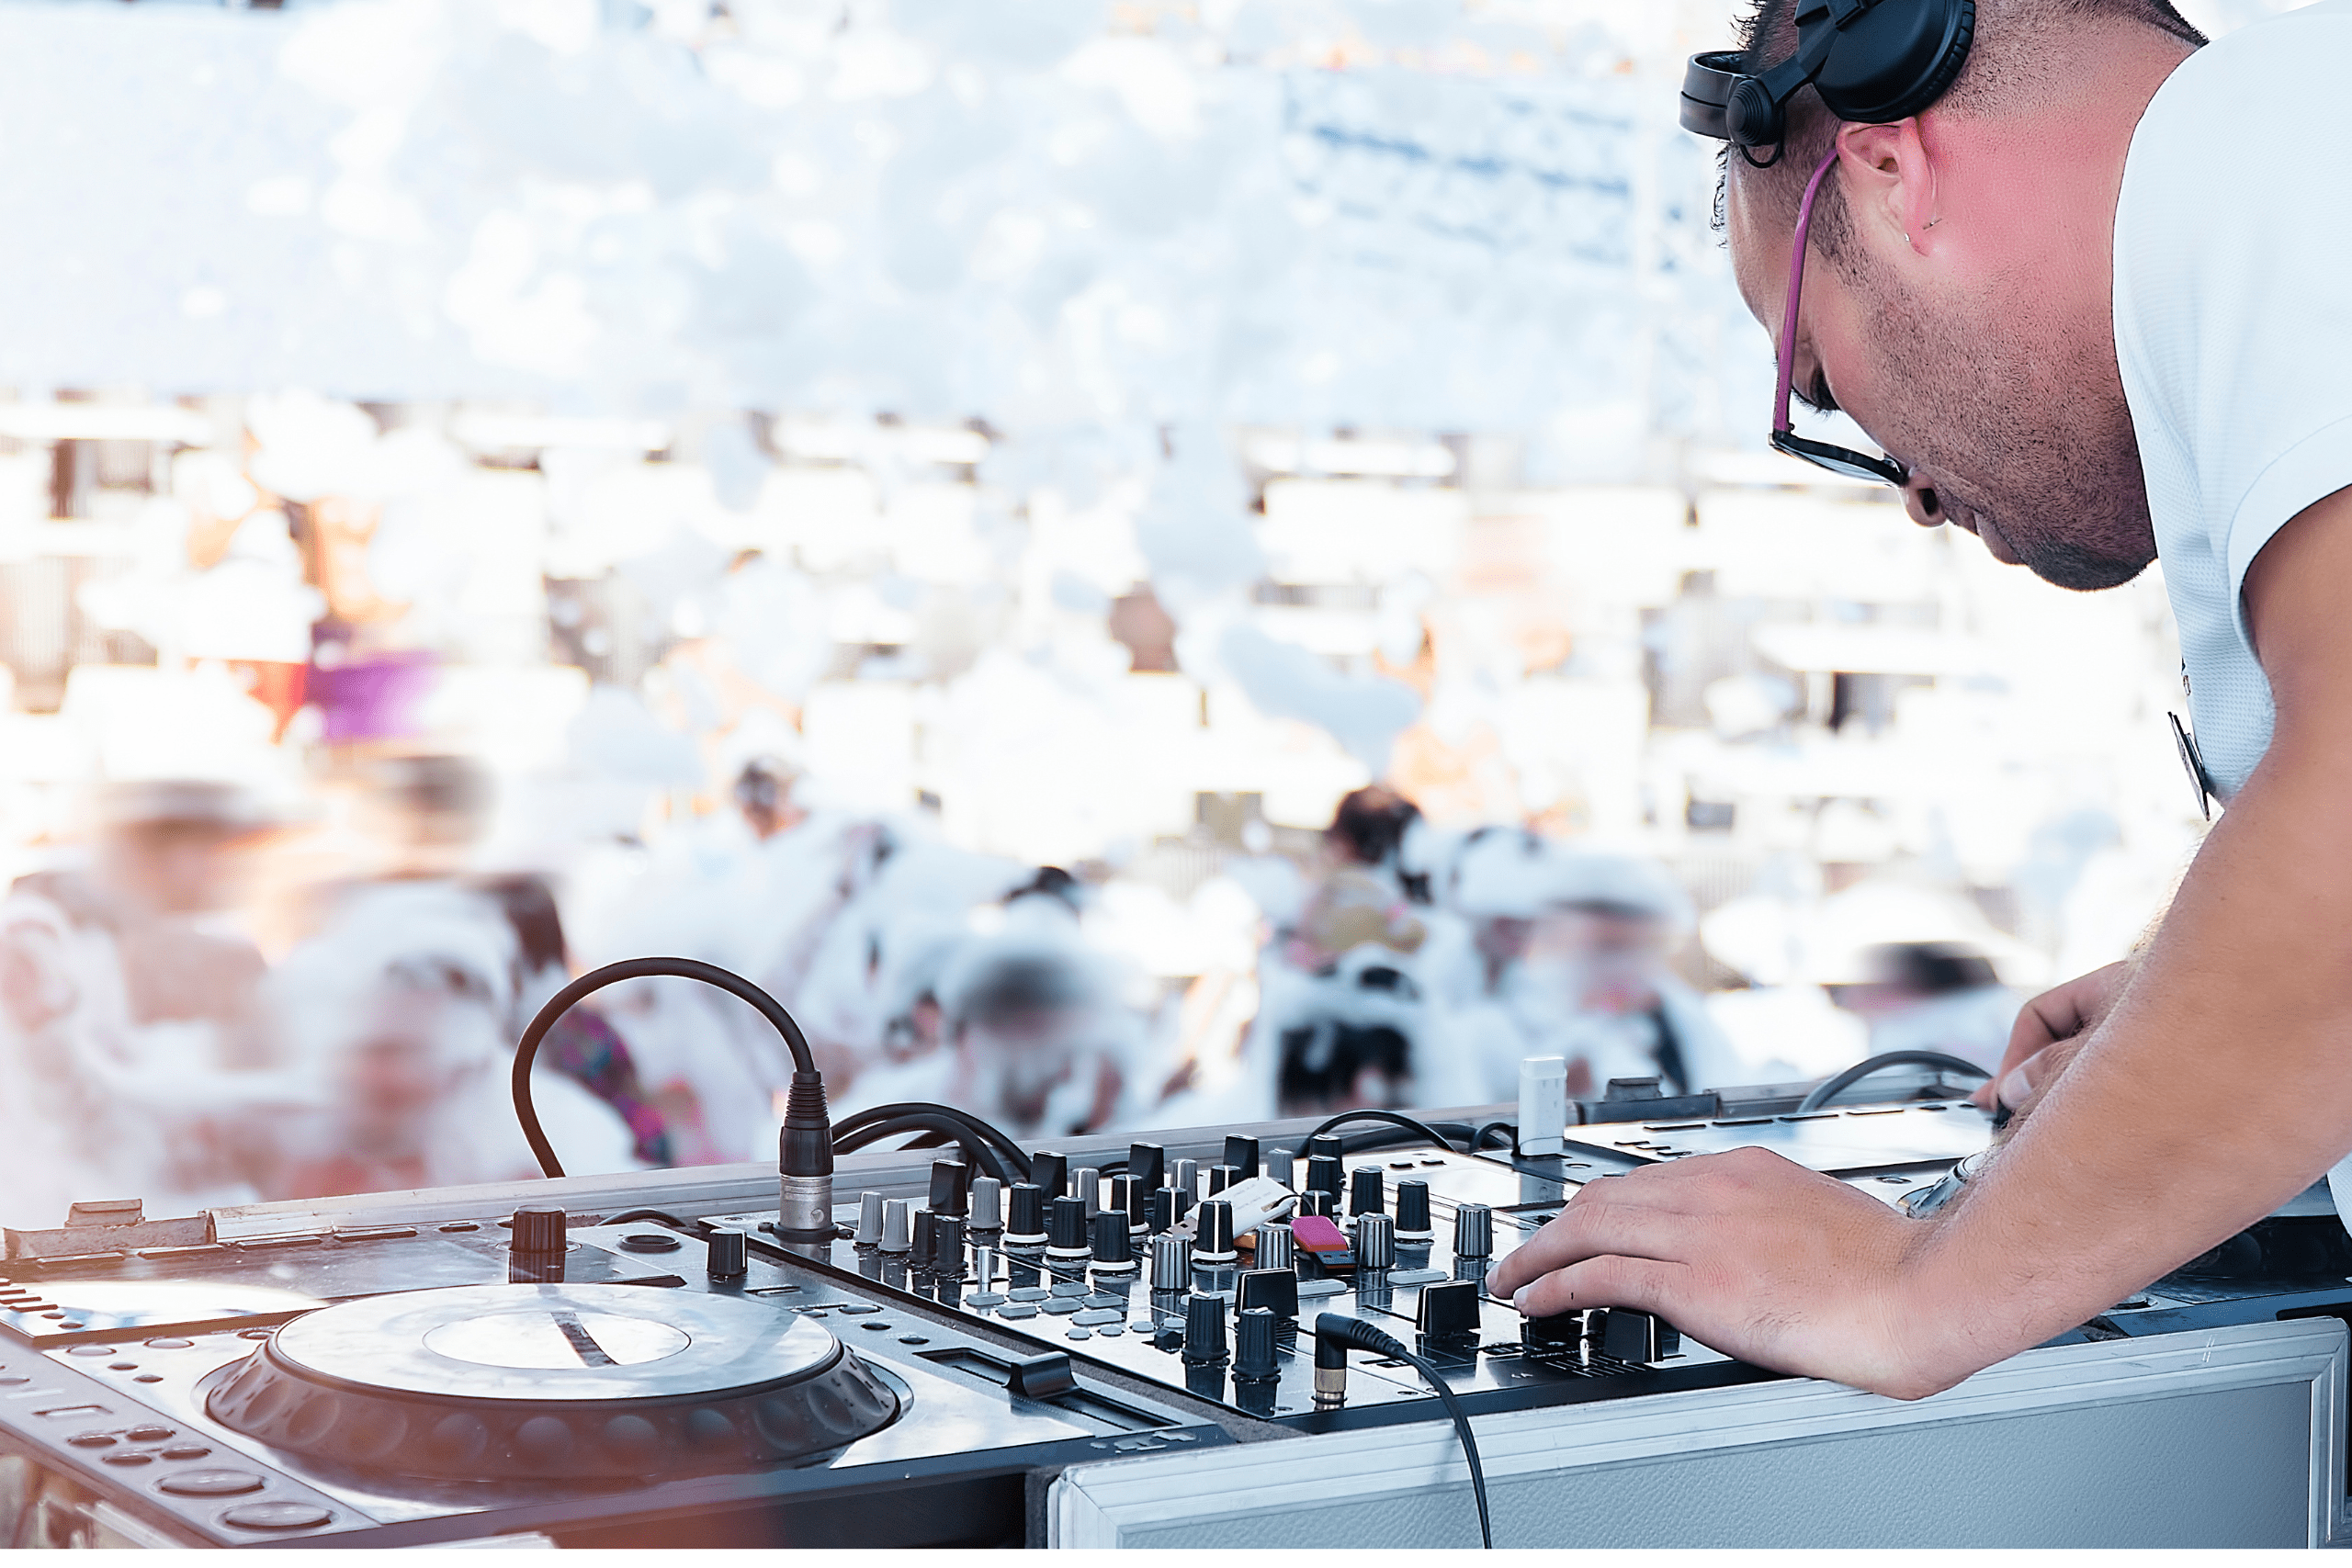 dj playing set a festival in front of audience